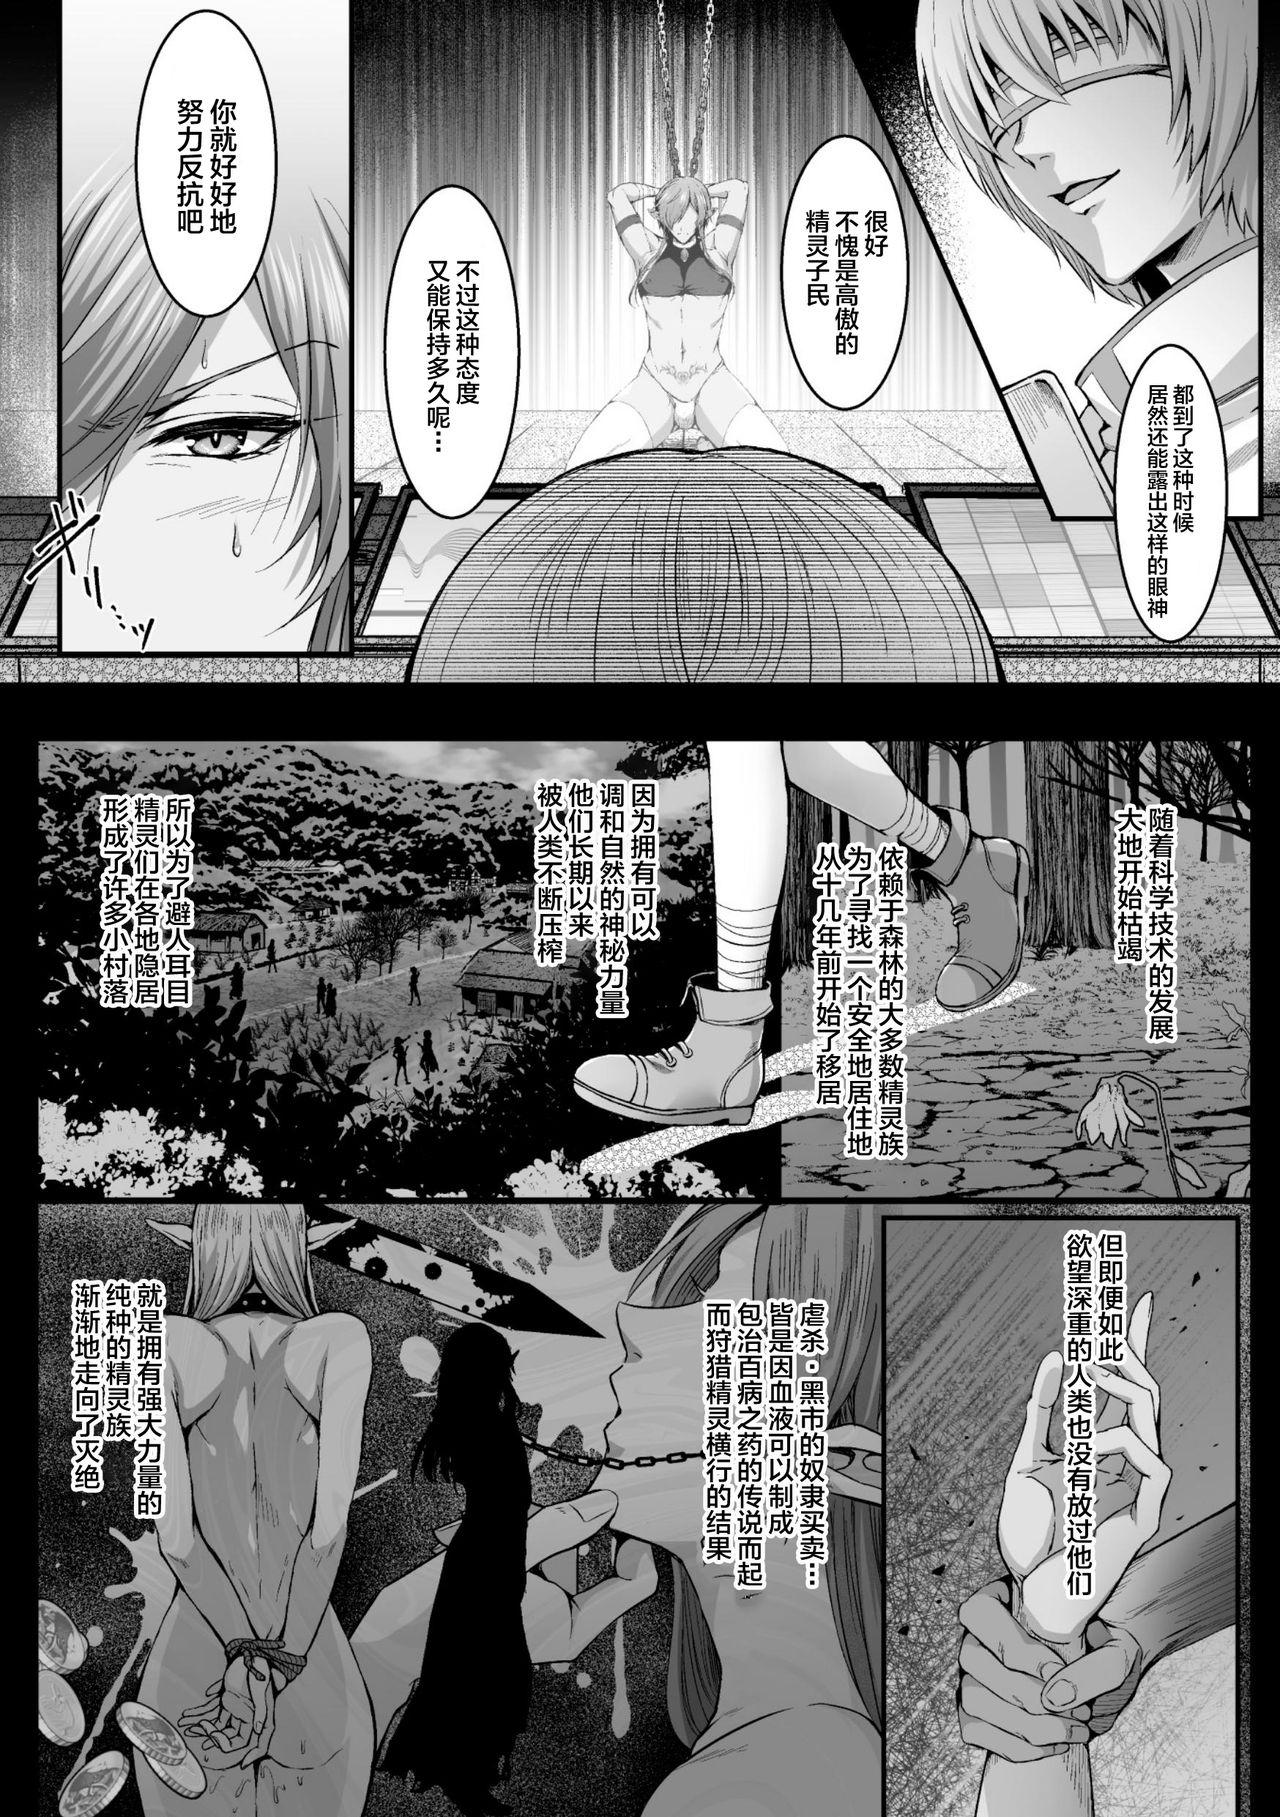 Old And Young エルフ搾精実験 魔悦に堕ちる清き魂 Bwc - Page 2